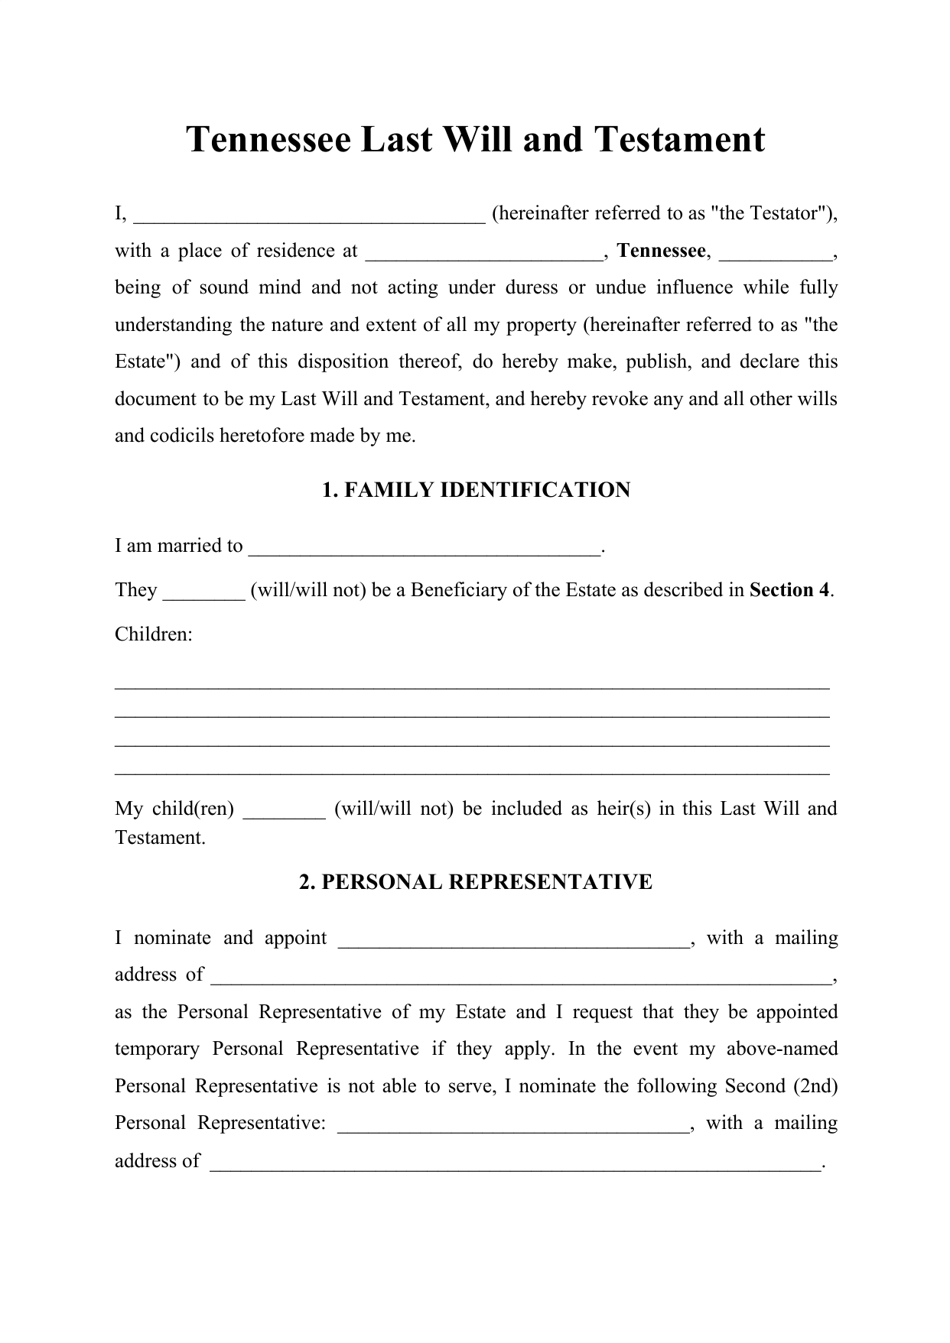 Tennessee Last Will and Testament Template Download Printable PDF